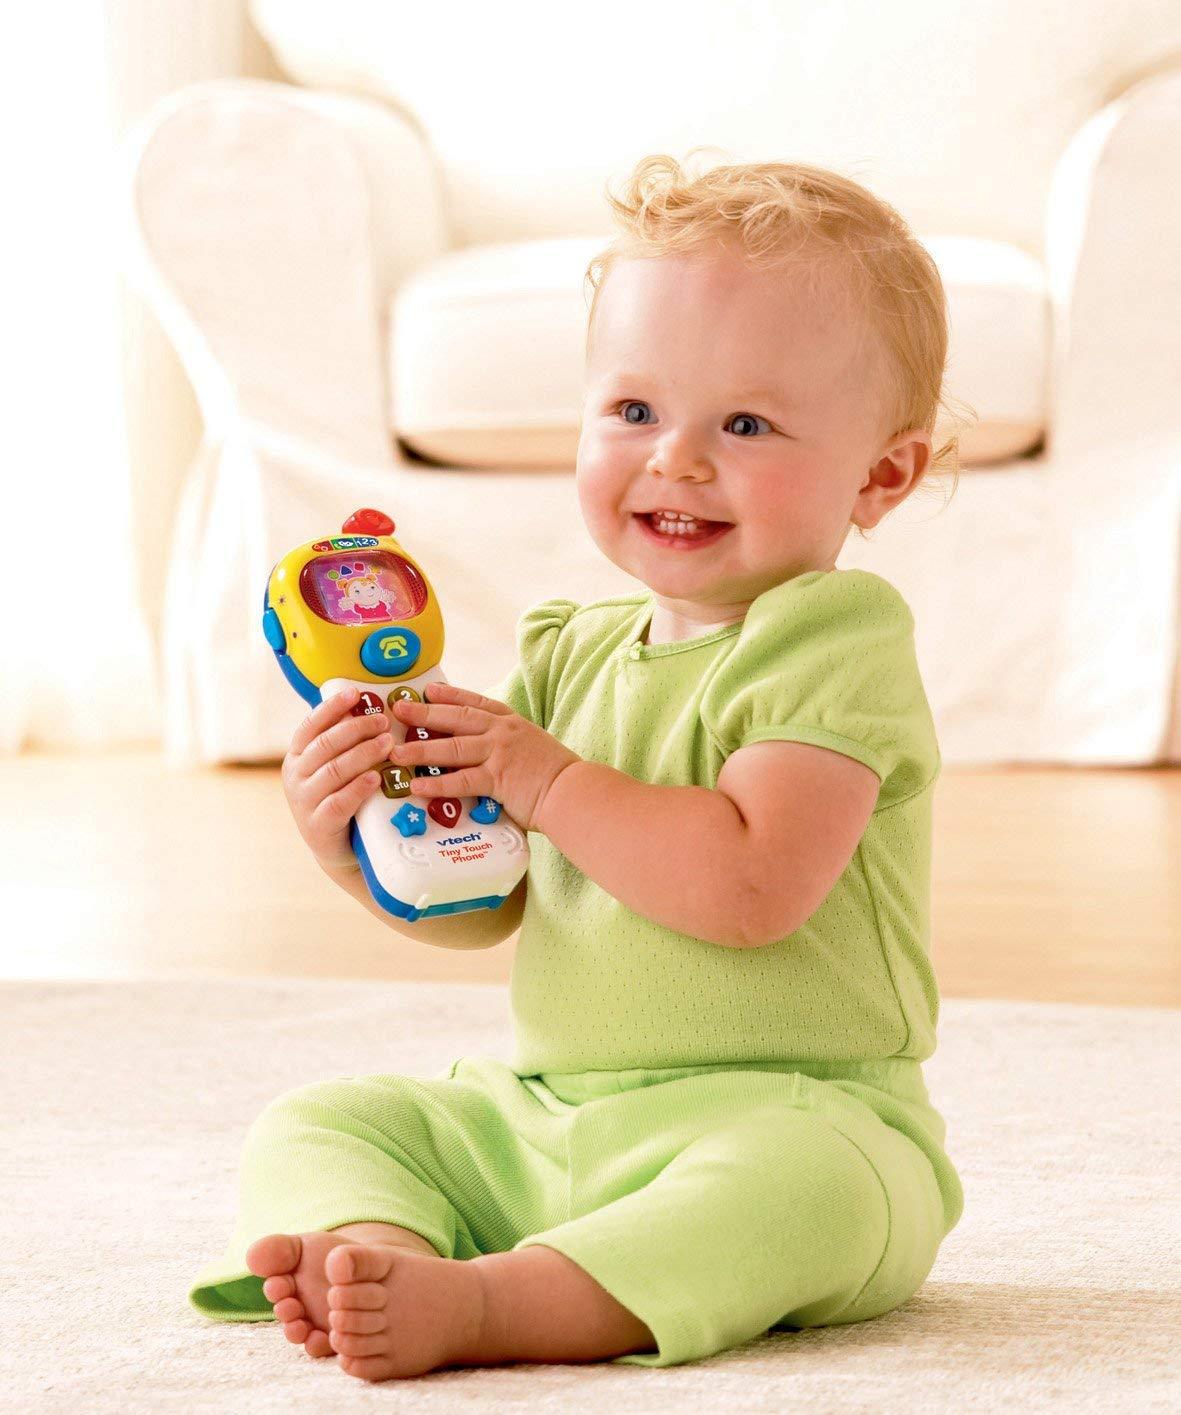 VTech Tiny Touch Phone Anne Claire Baby Store 